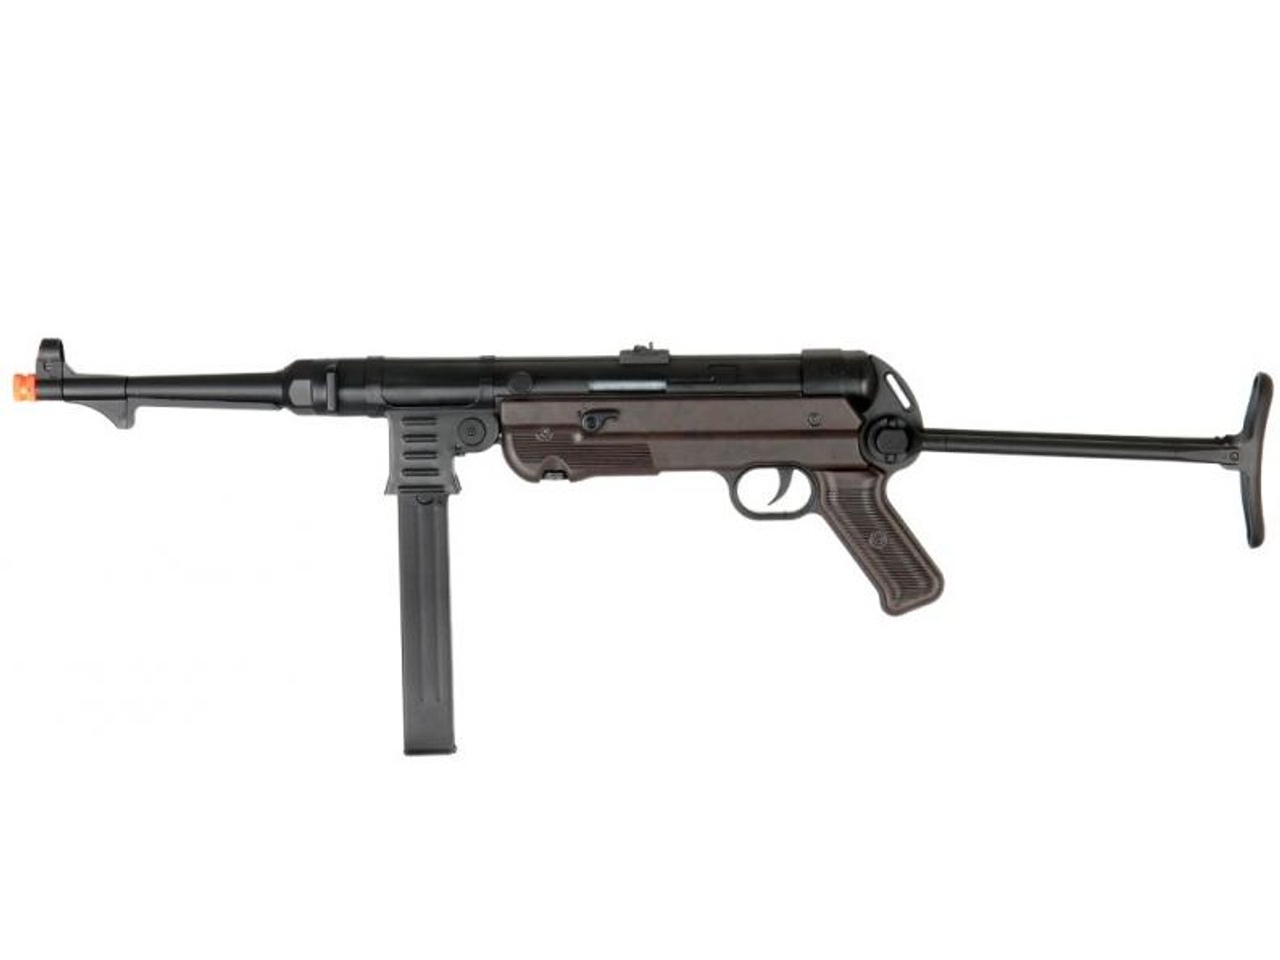 UK Arms AGM MP40 Full Metal SMG Airsoft Rifle